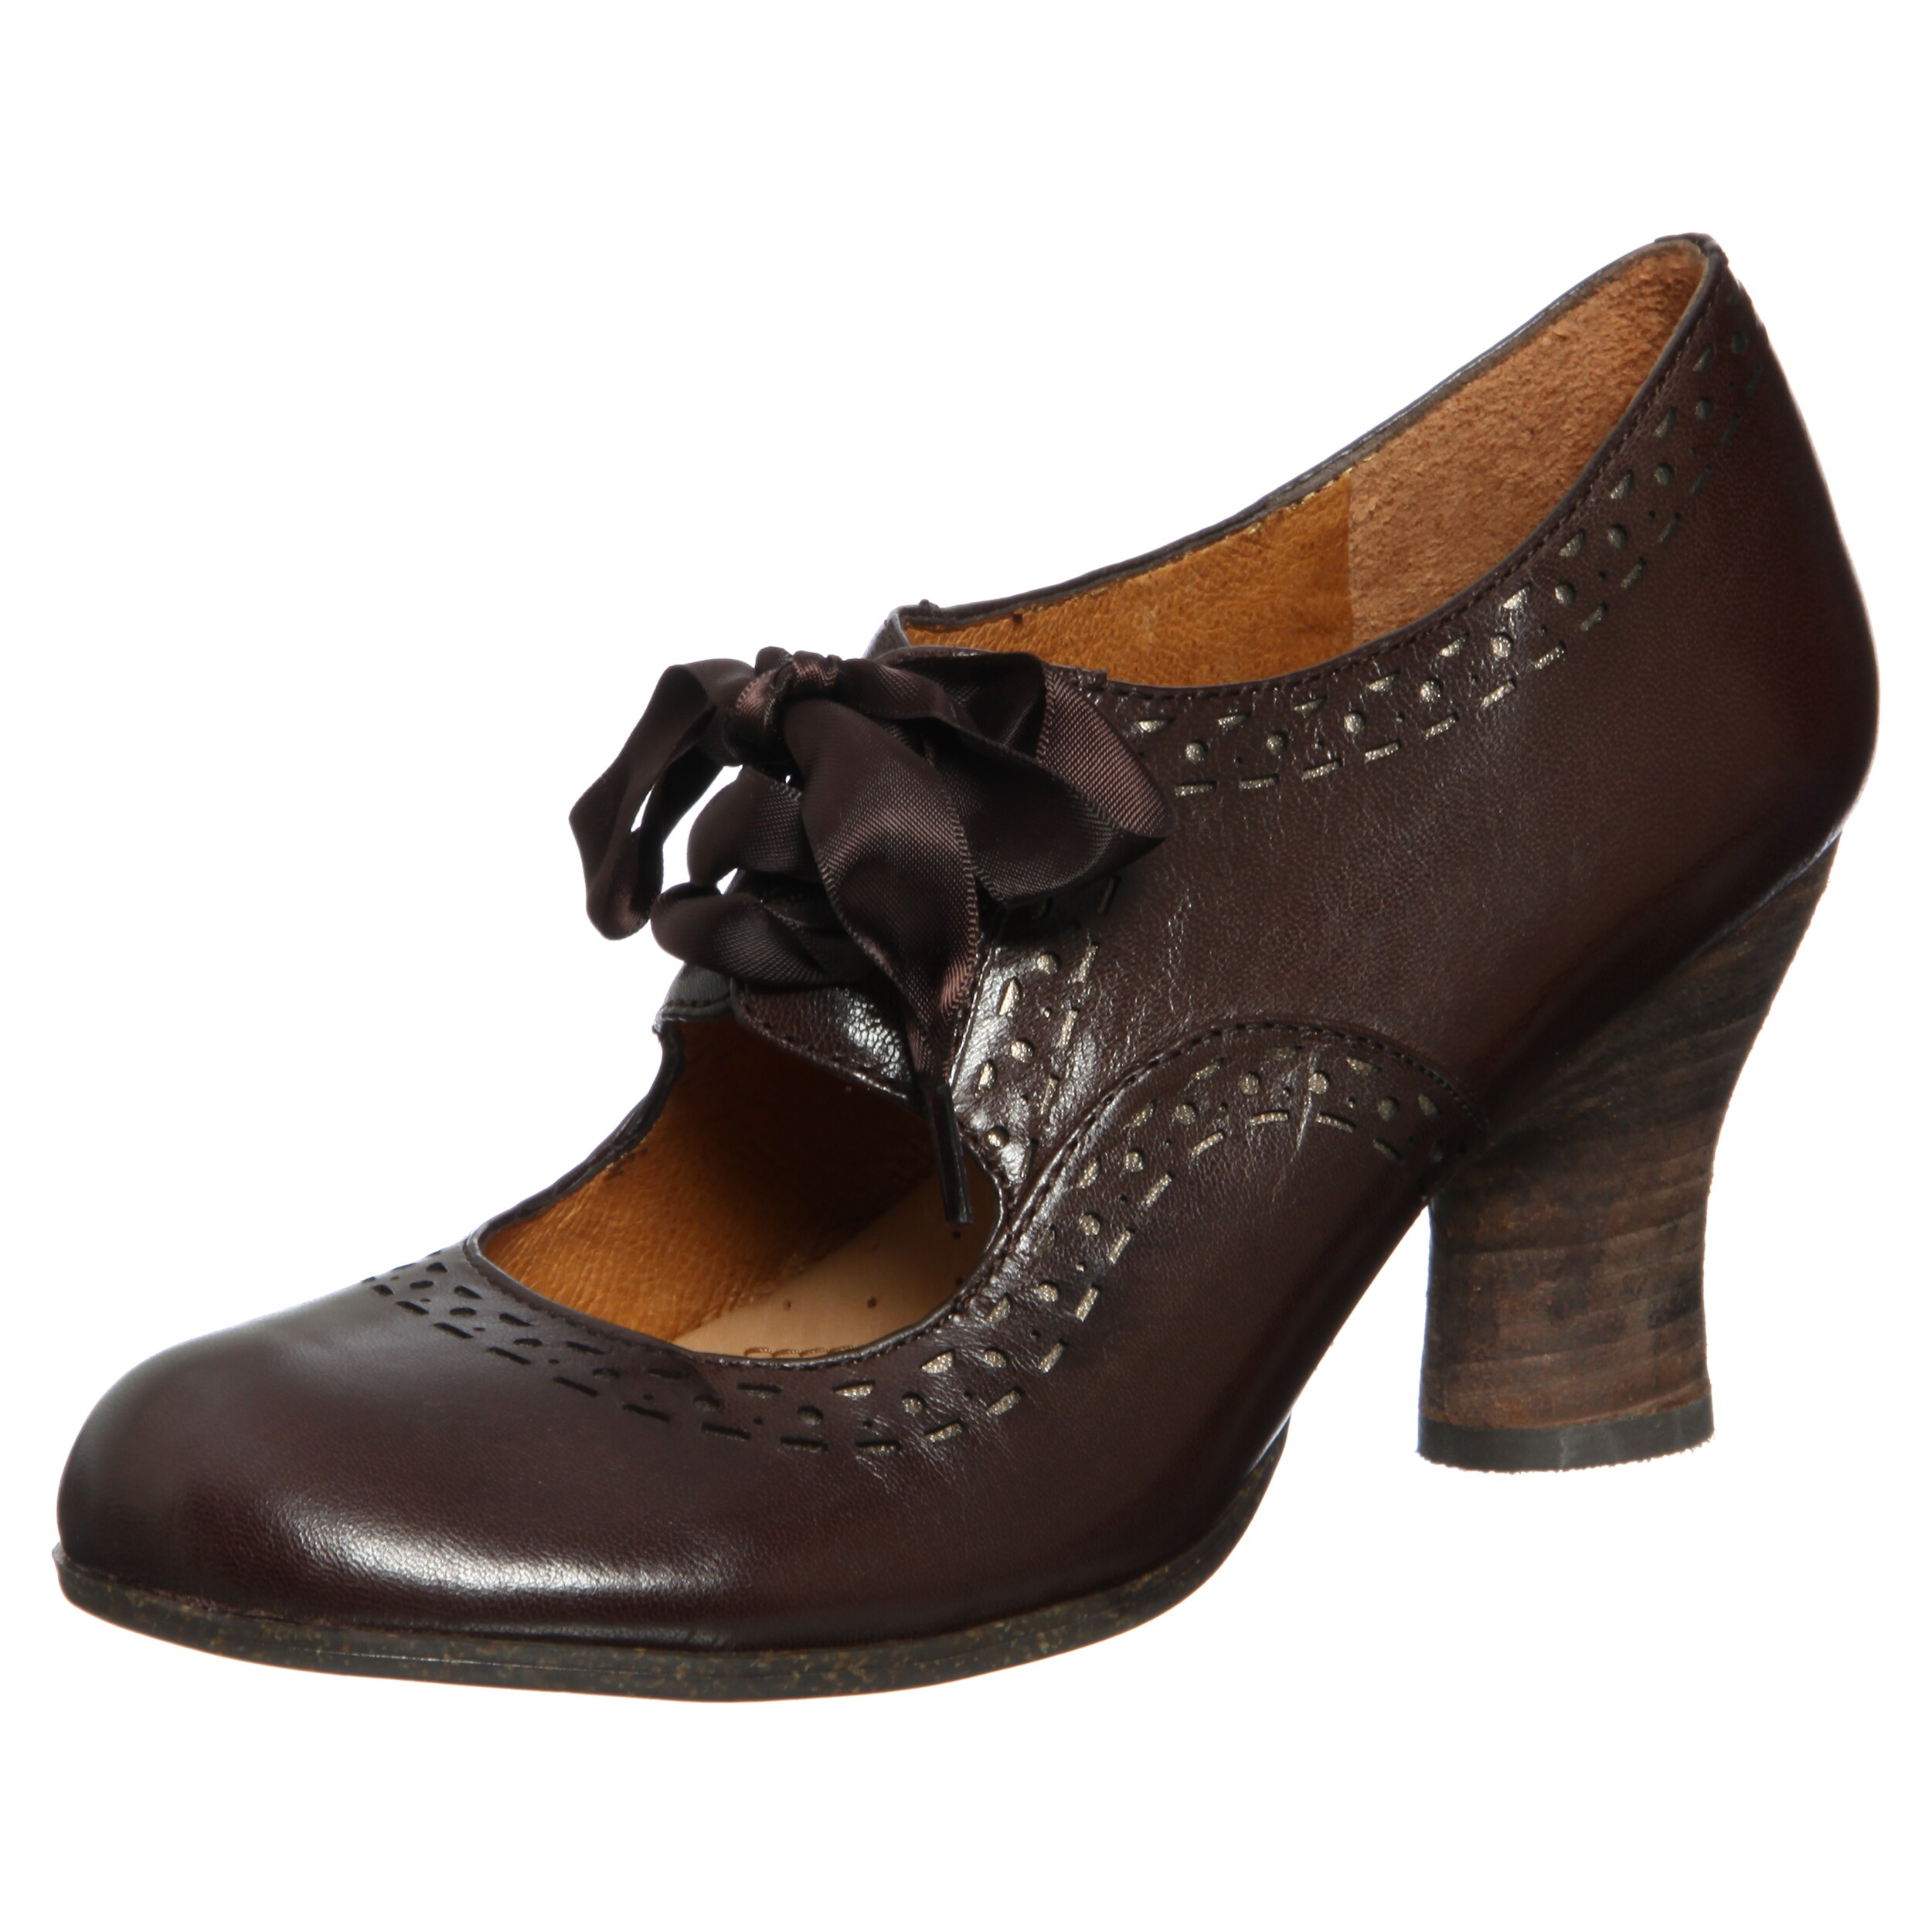 mary jane oxford pumps